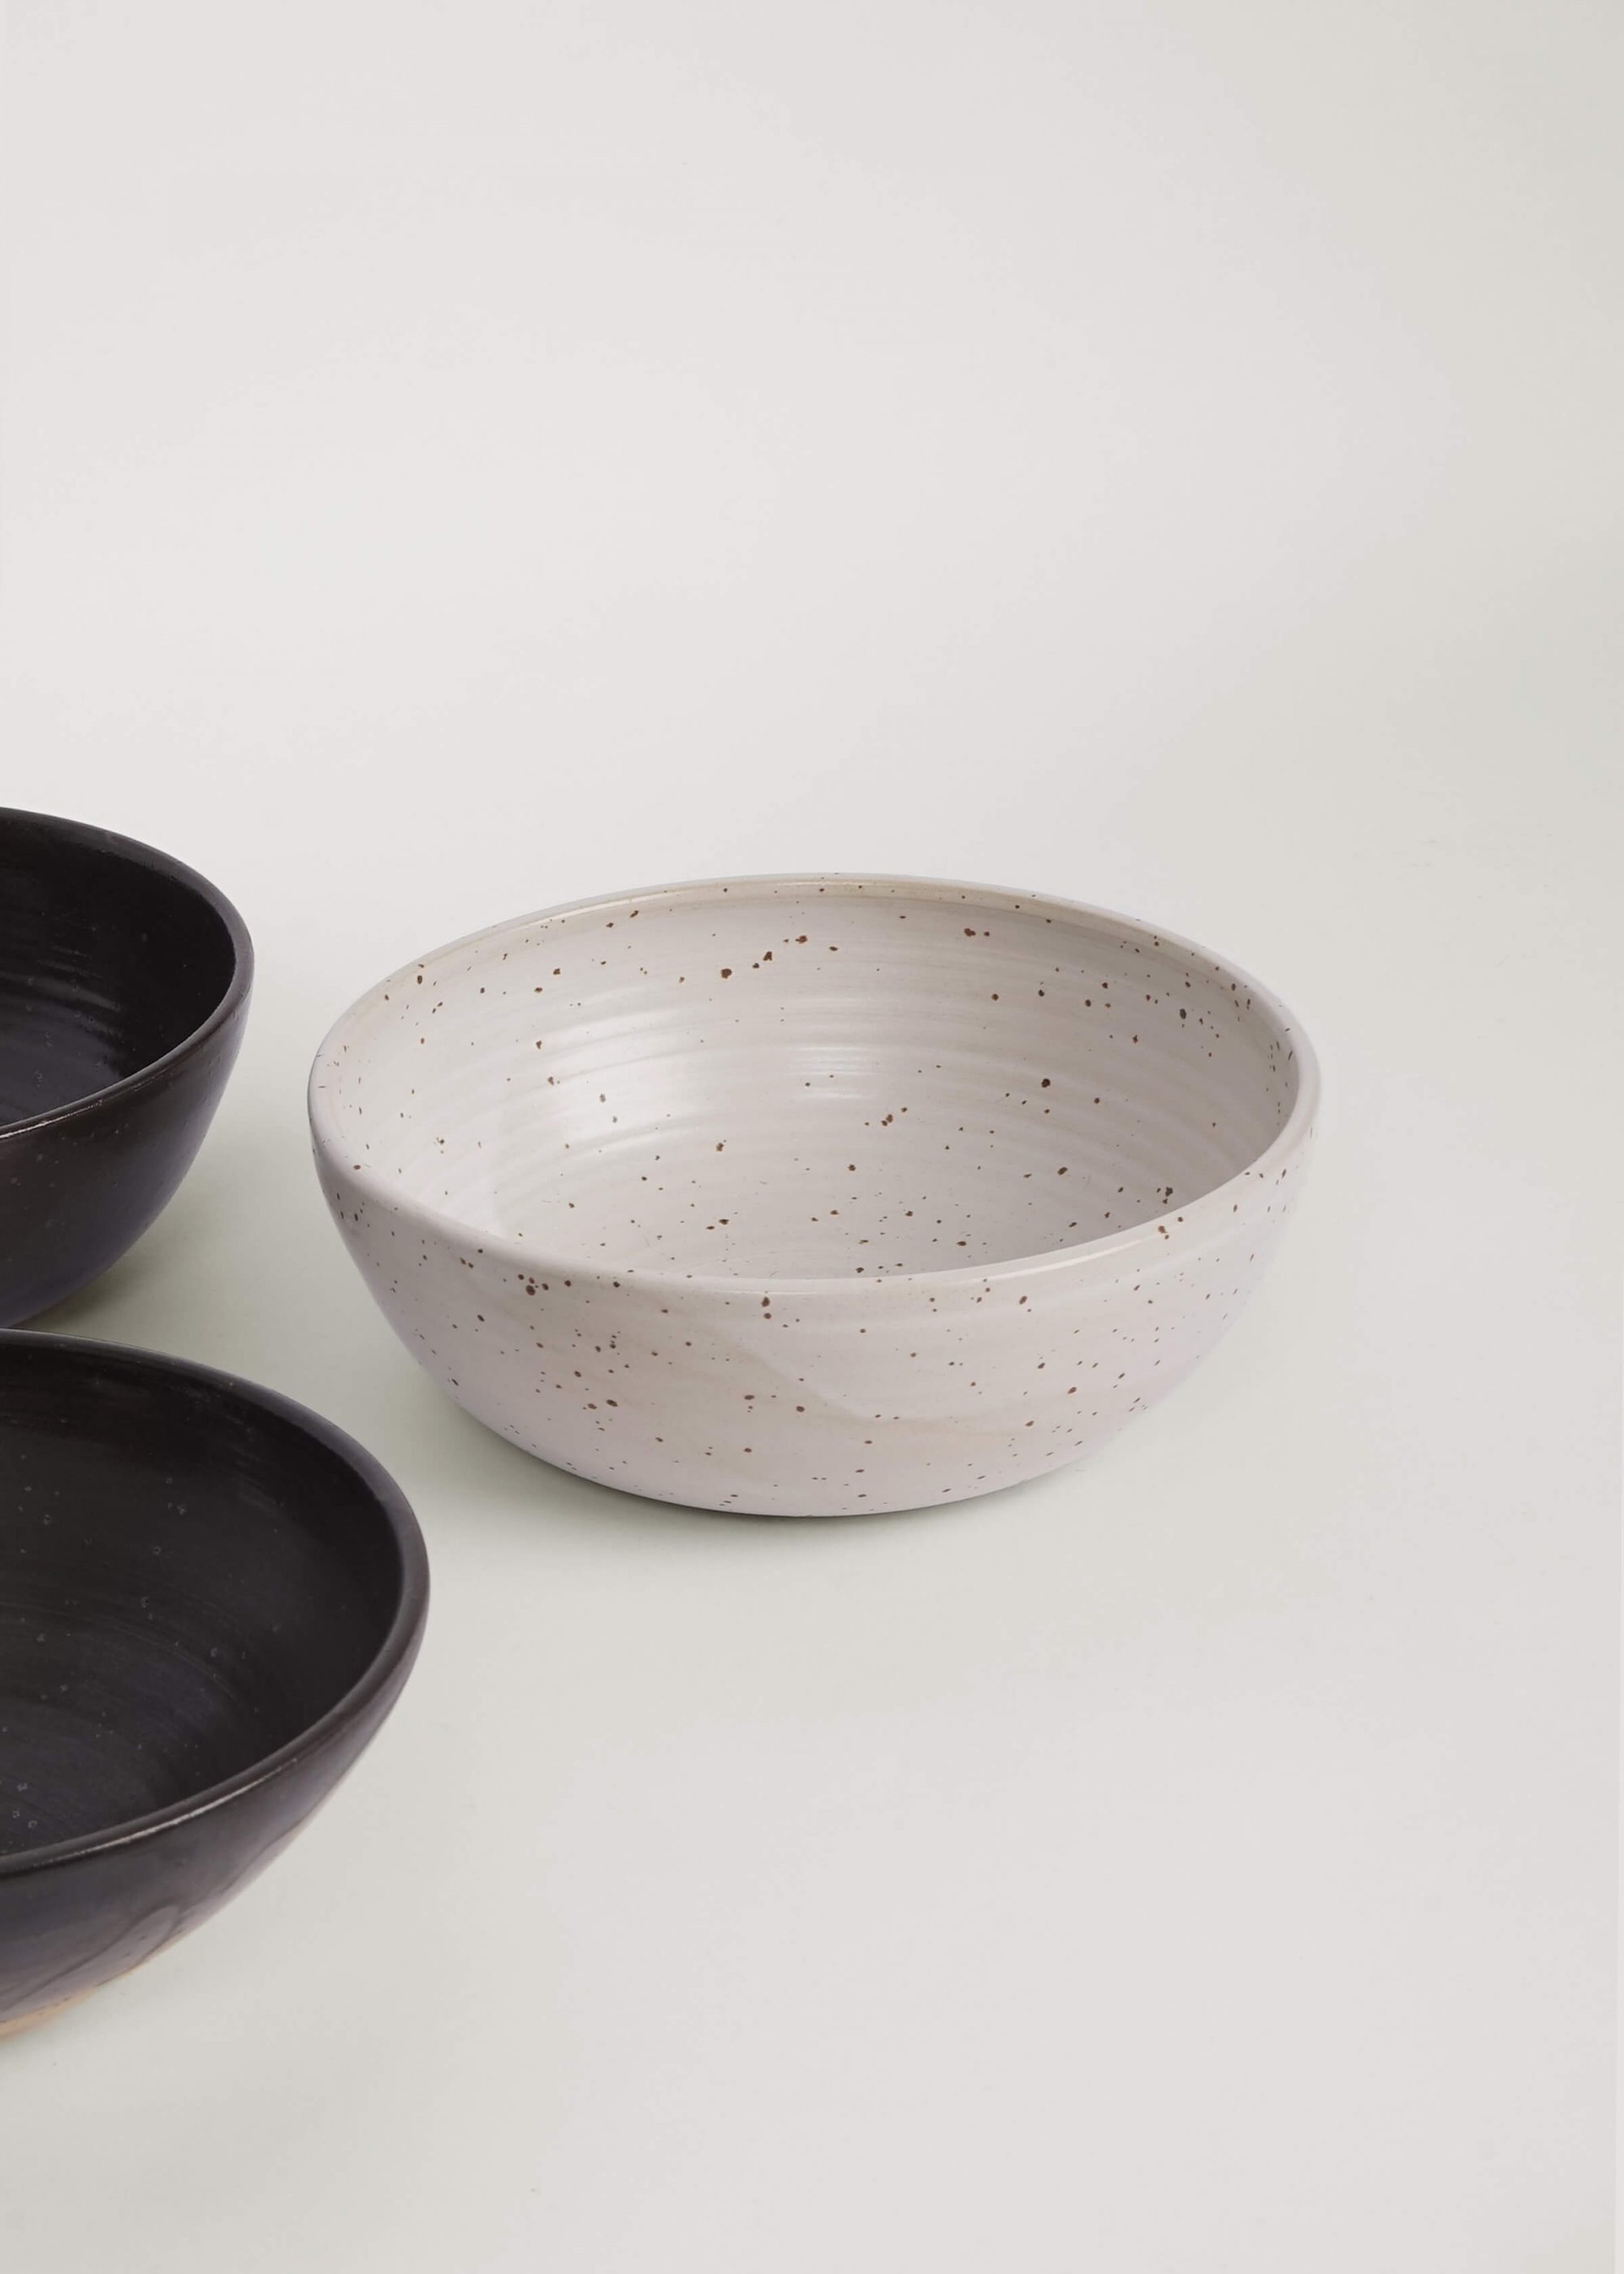 Product image for »Wildenhain« White Speckled Stoneware Bowl